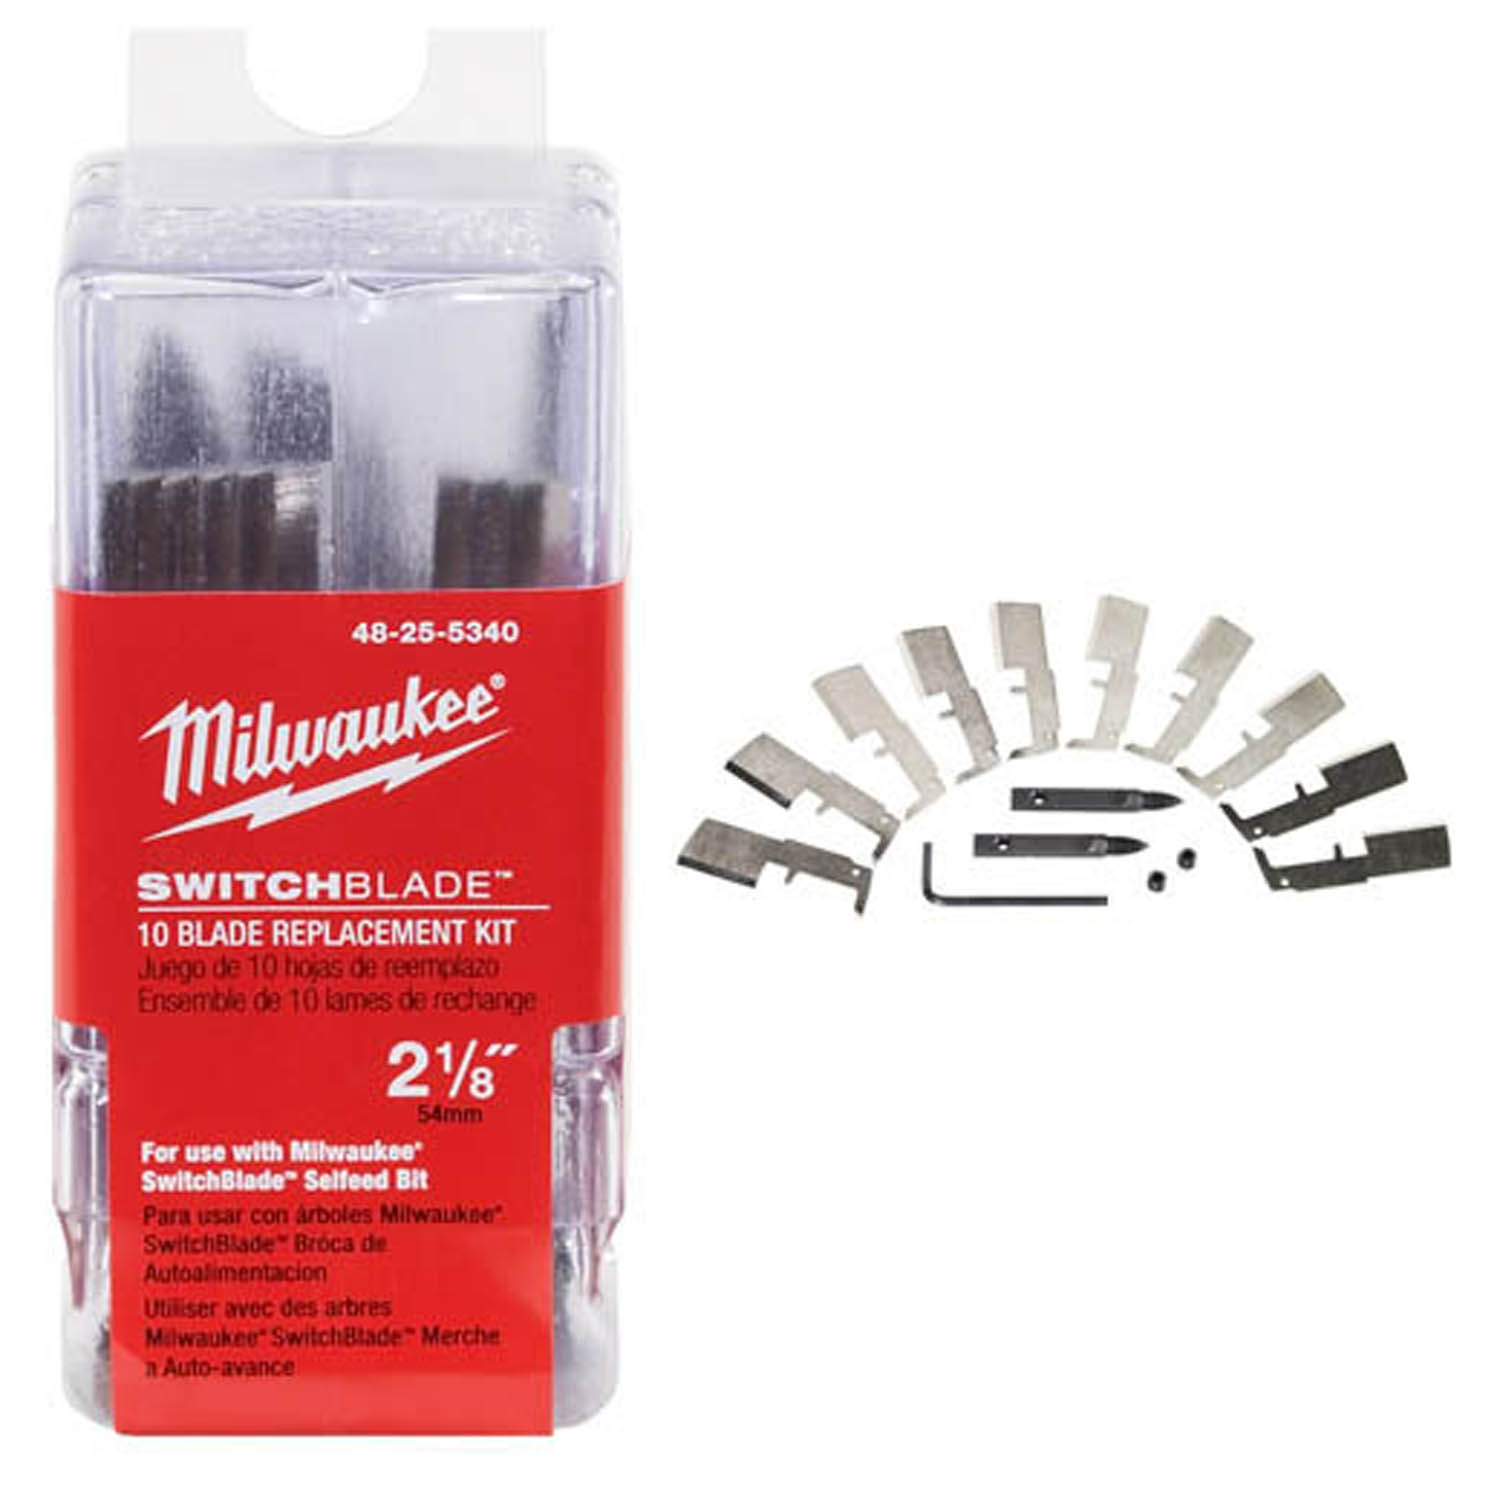 1-3/8 in. SwitchBlade 10 Blade Replacement Kit